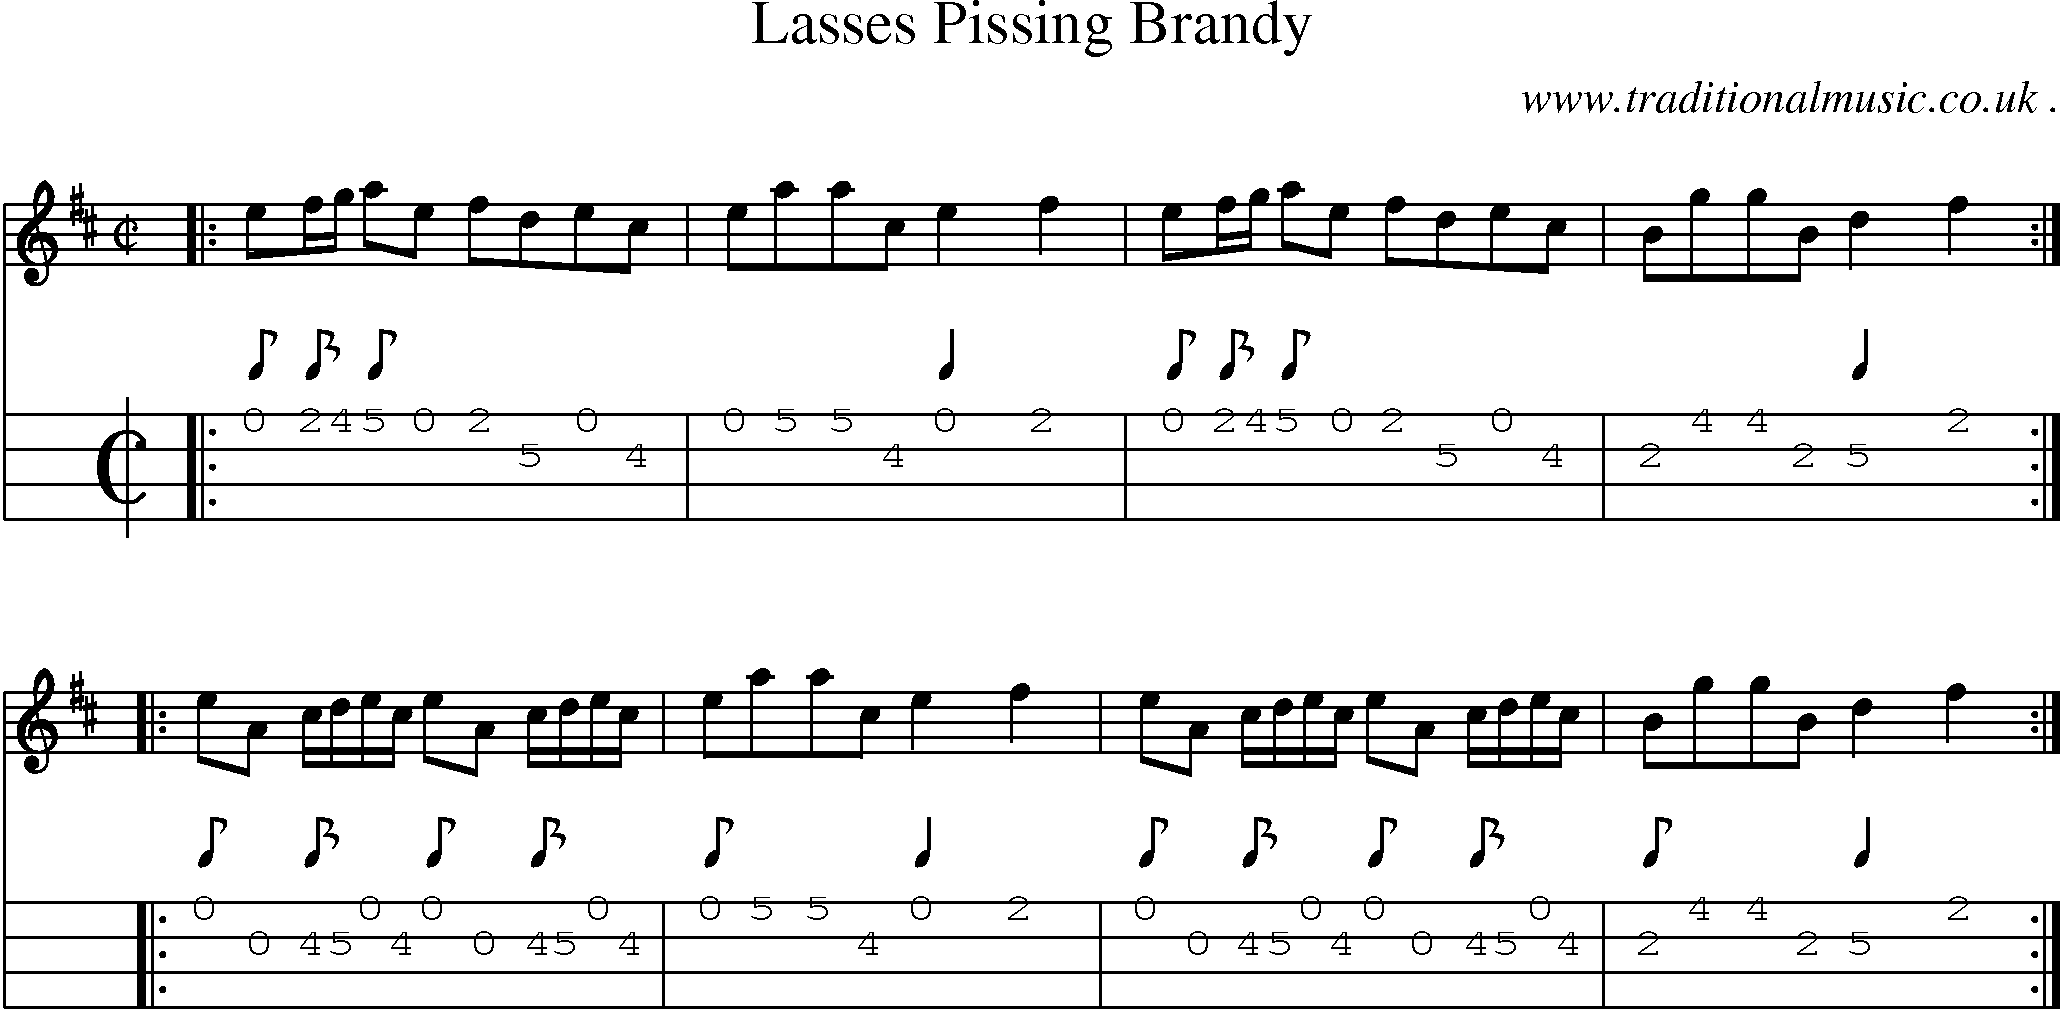 Sheet-music  score, Chords and Mandolin Tabs for Lasses Pissing Brandy